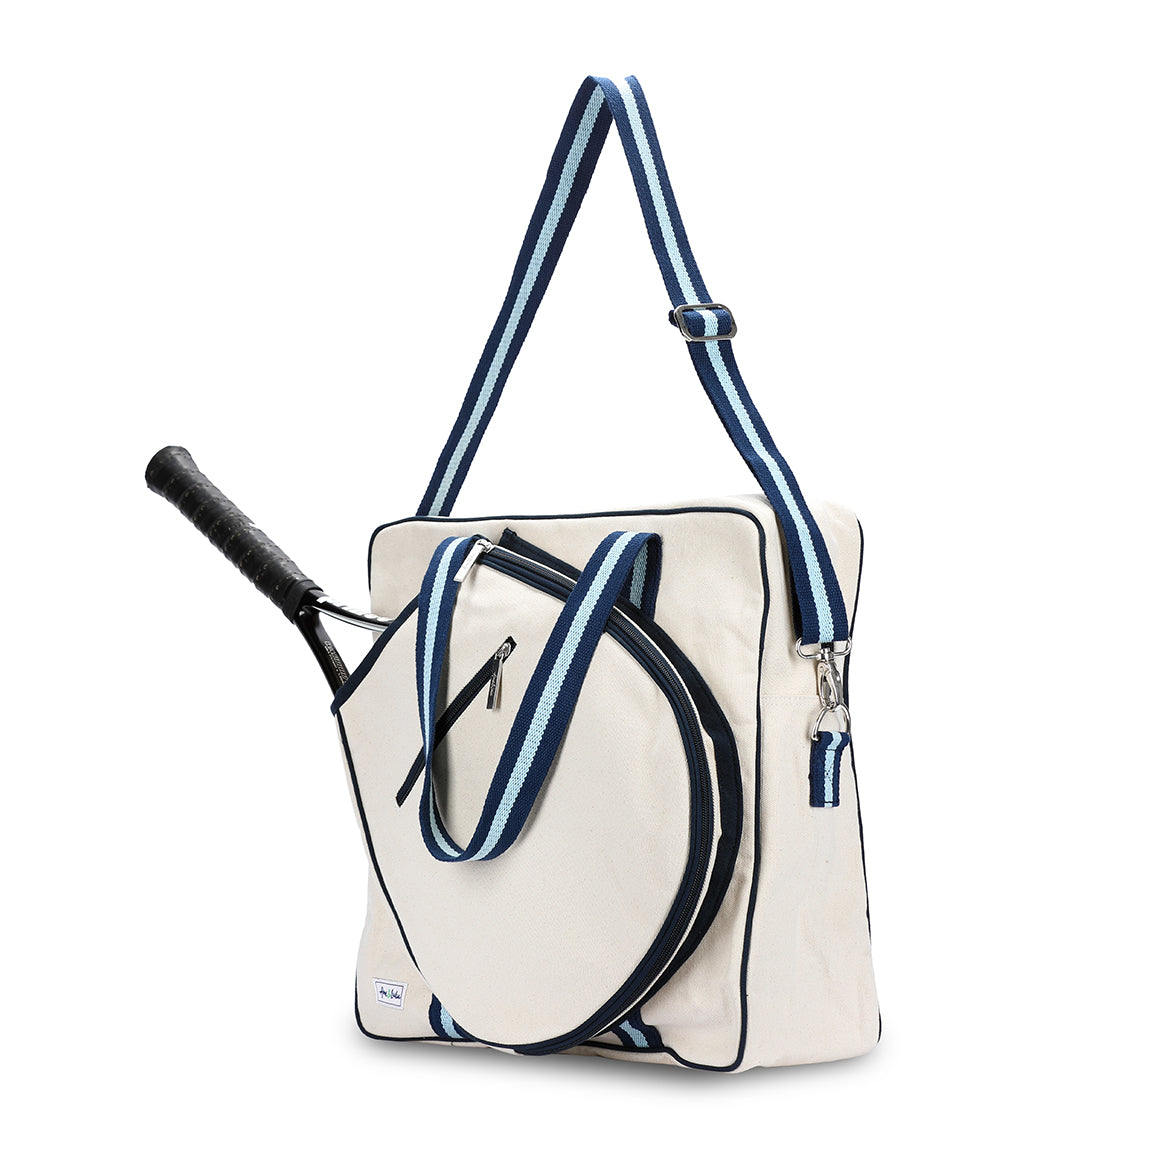 Side view of large canvas tennis tote with front pocket for tennis racquet. Straps are navy and blue striped.